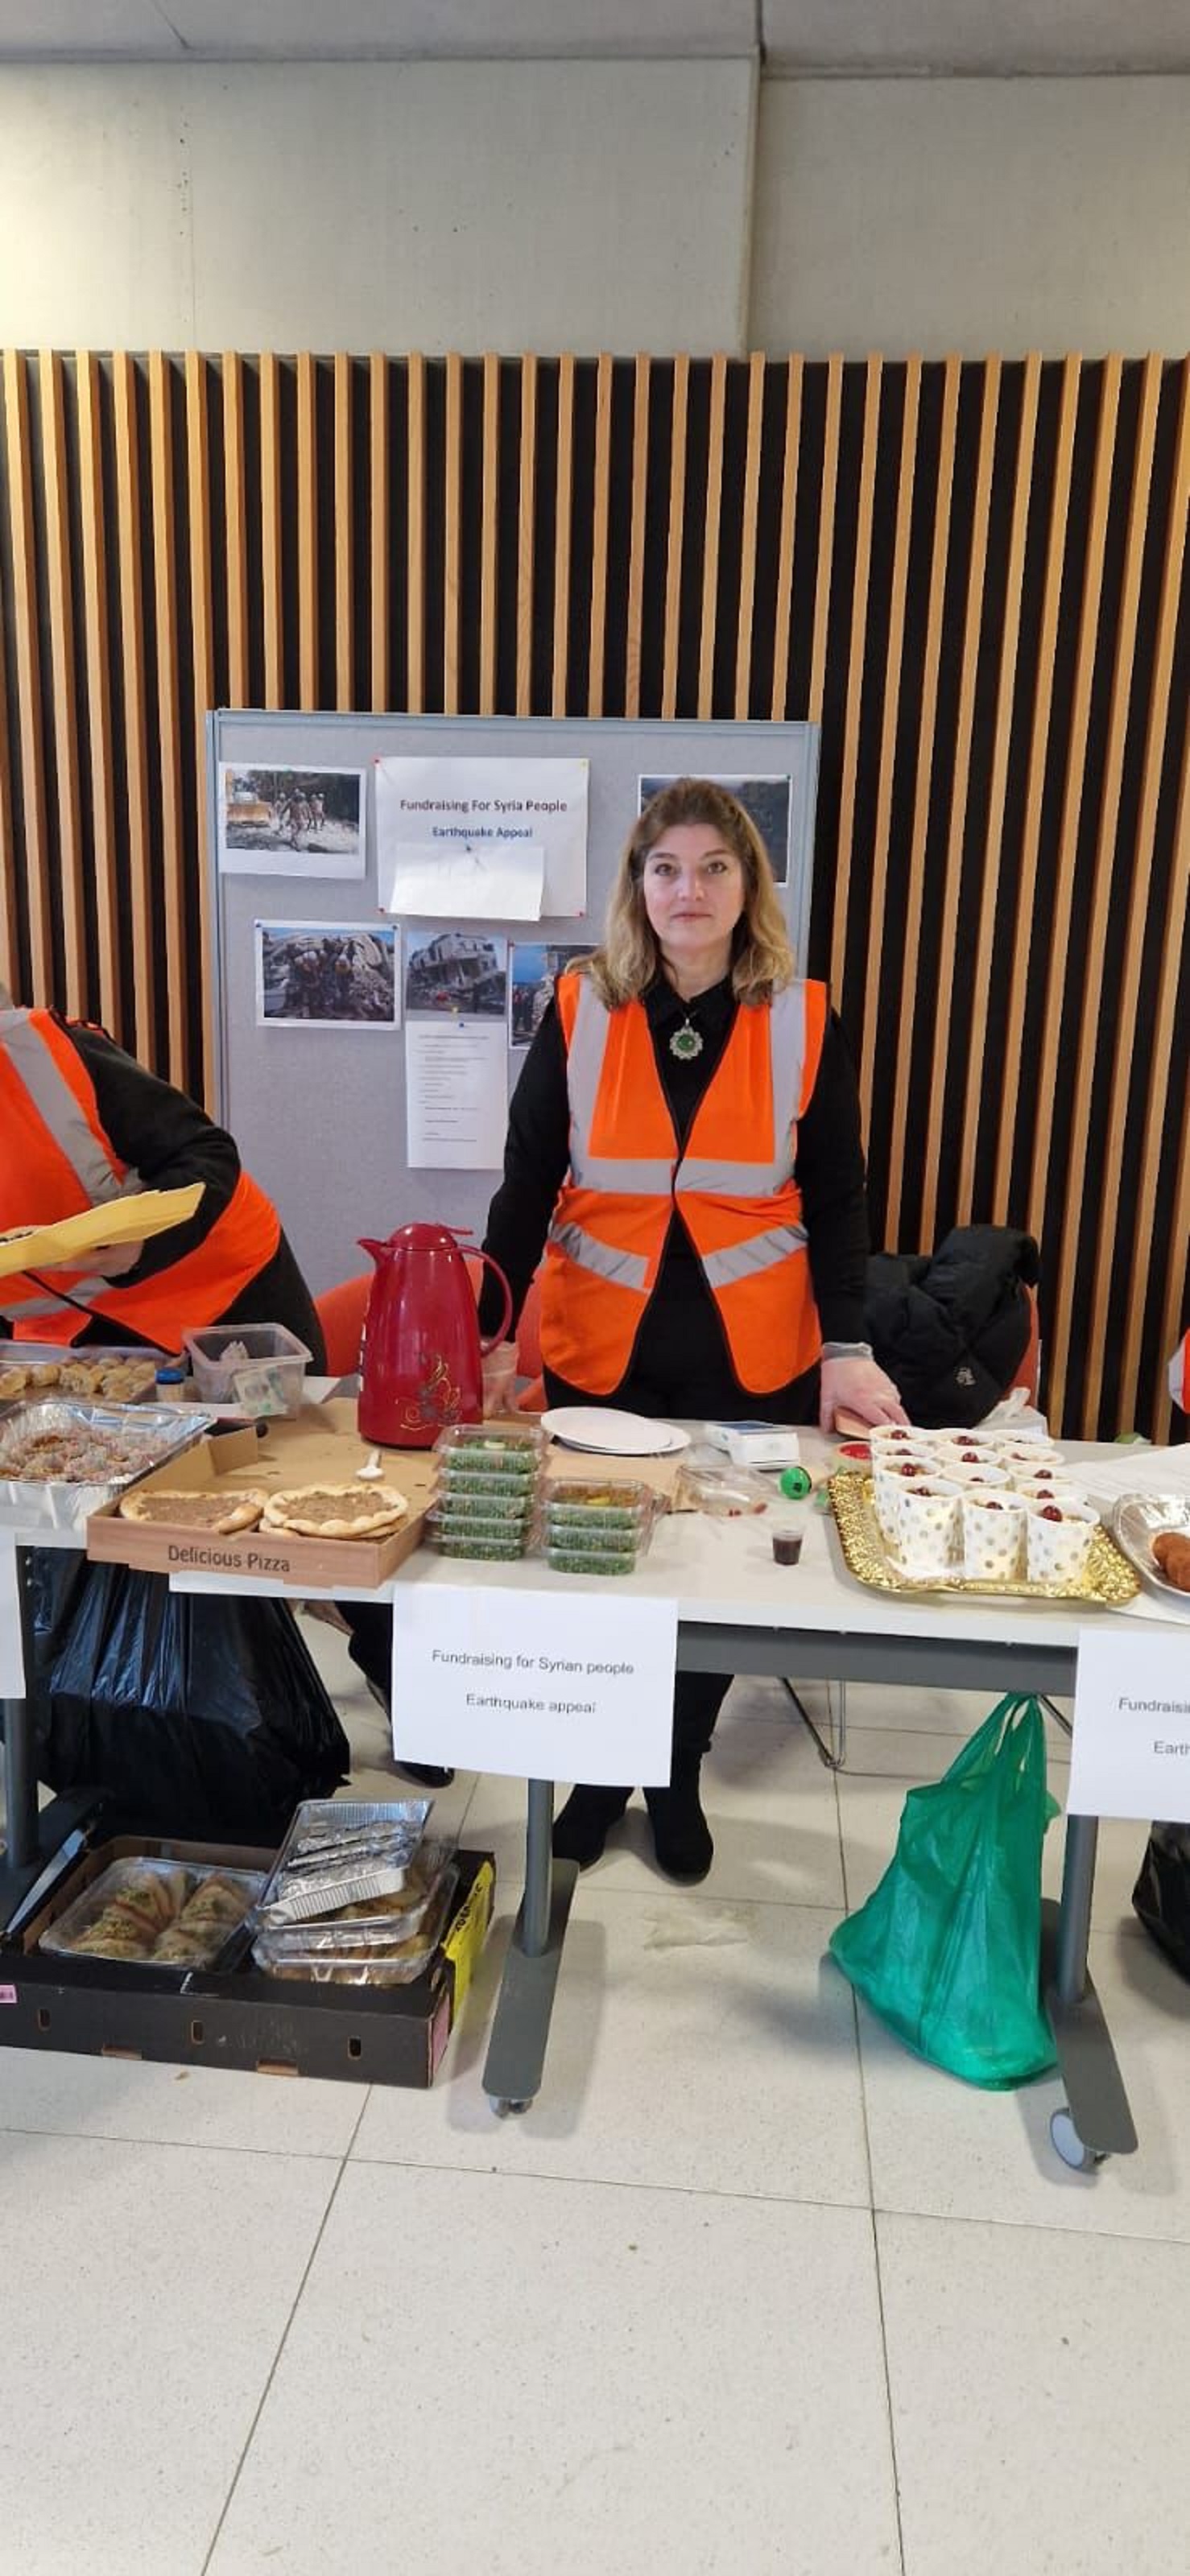 Lena Baurak, 57, from Nottingham, a board member at SCAN UK (Syrian Charities and Associations Network) at a fundraising event for Syrian earthquake victims